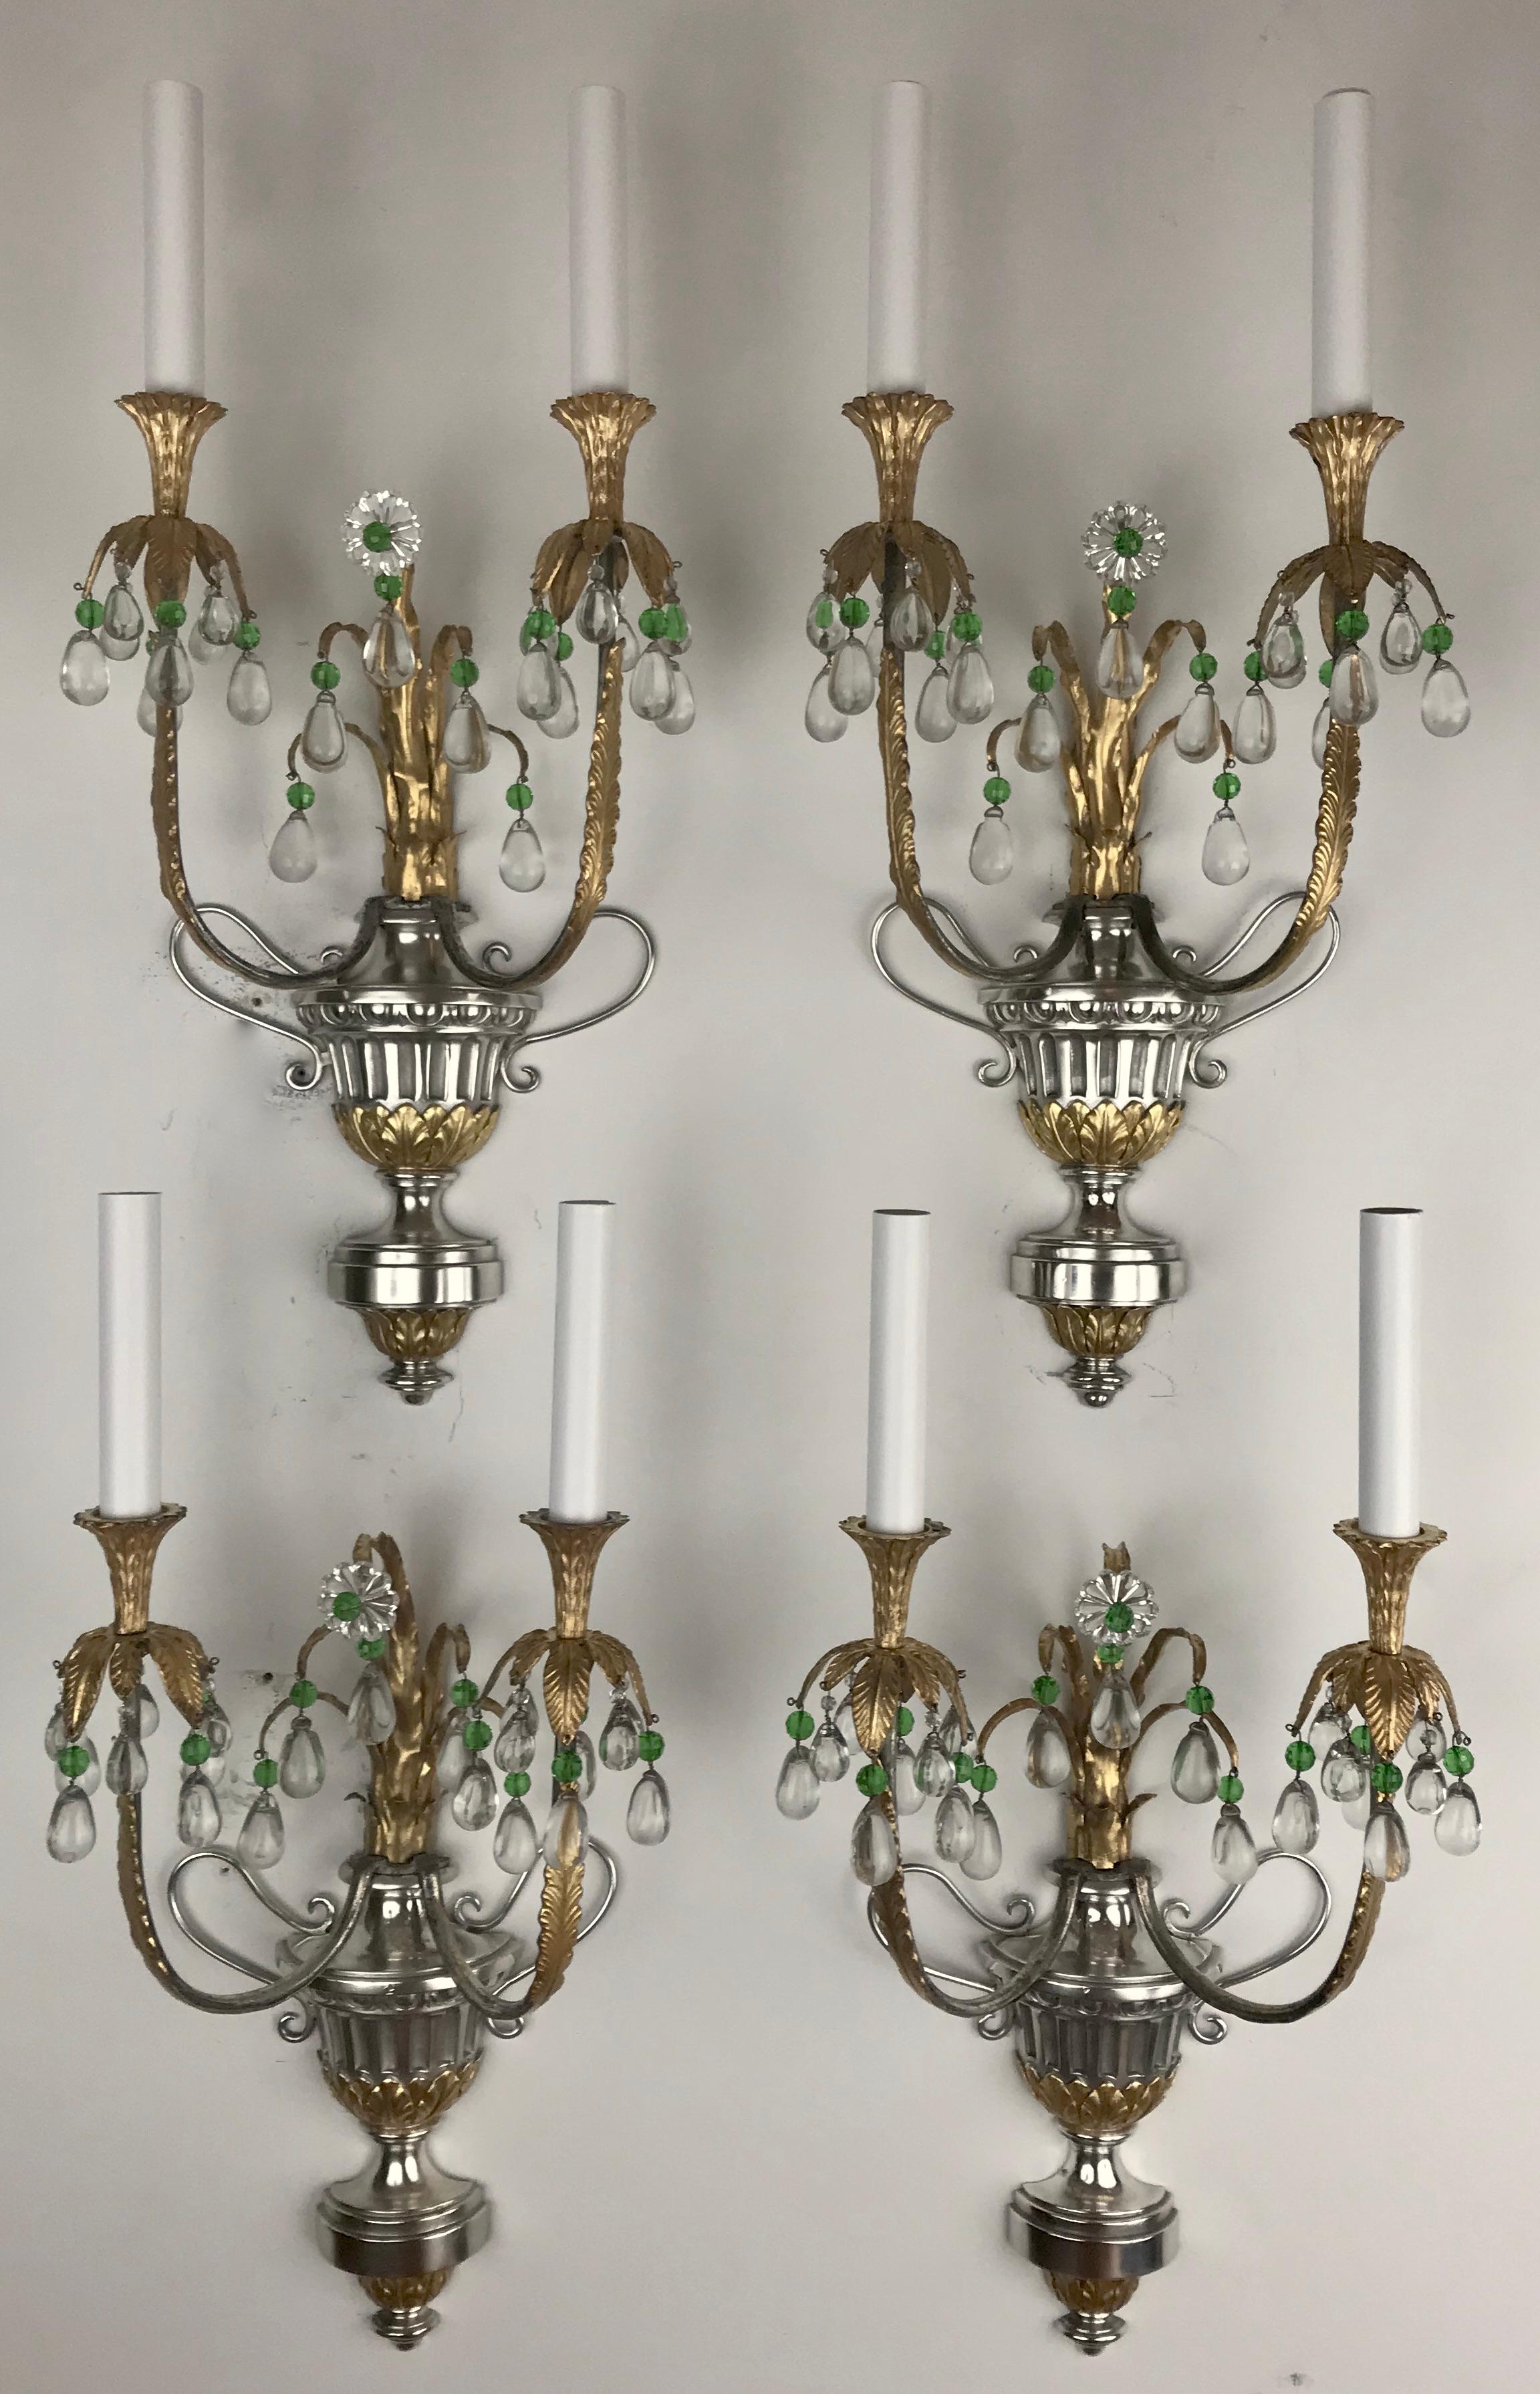  Four Silver and Gilt Bronze Sconces with Green Crystal Accents by Caldwell For Sale 3